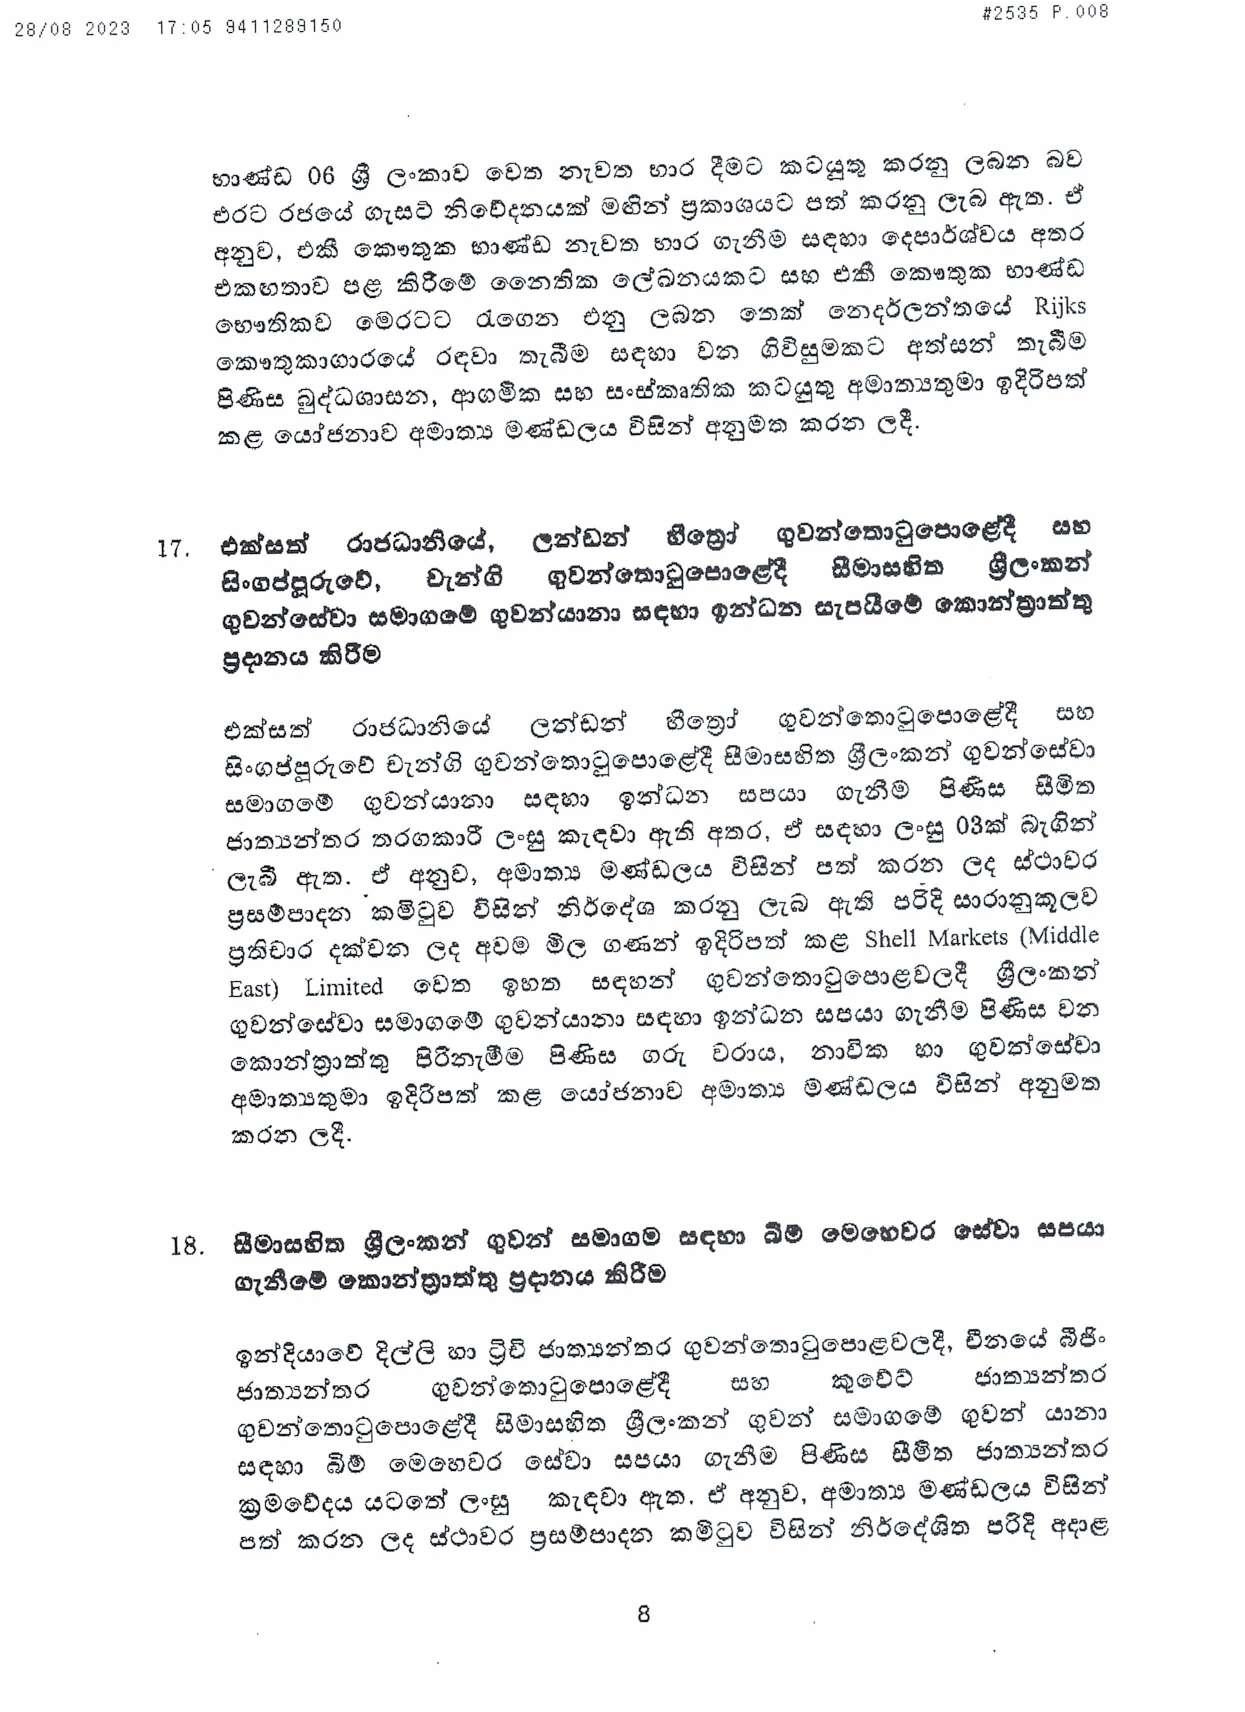 Cabinet Decision on 28.08.2023 1 page 008